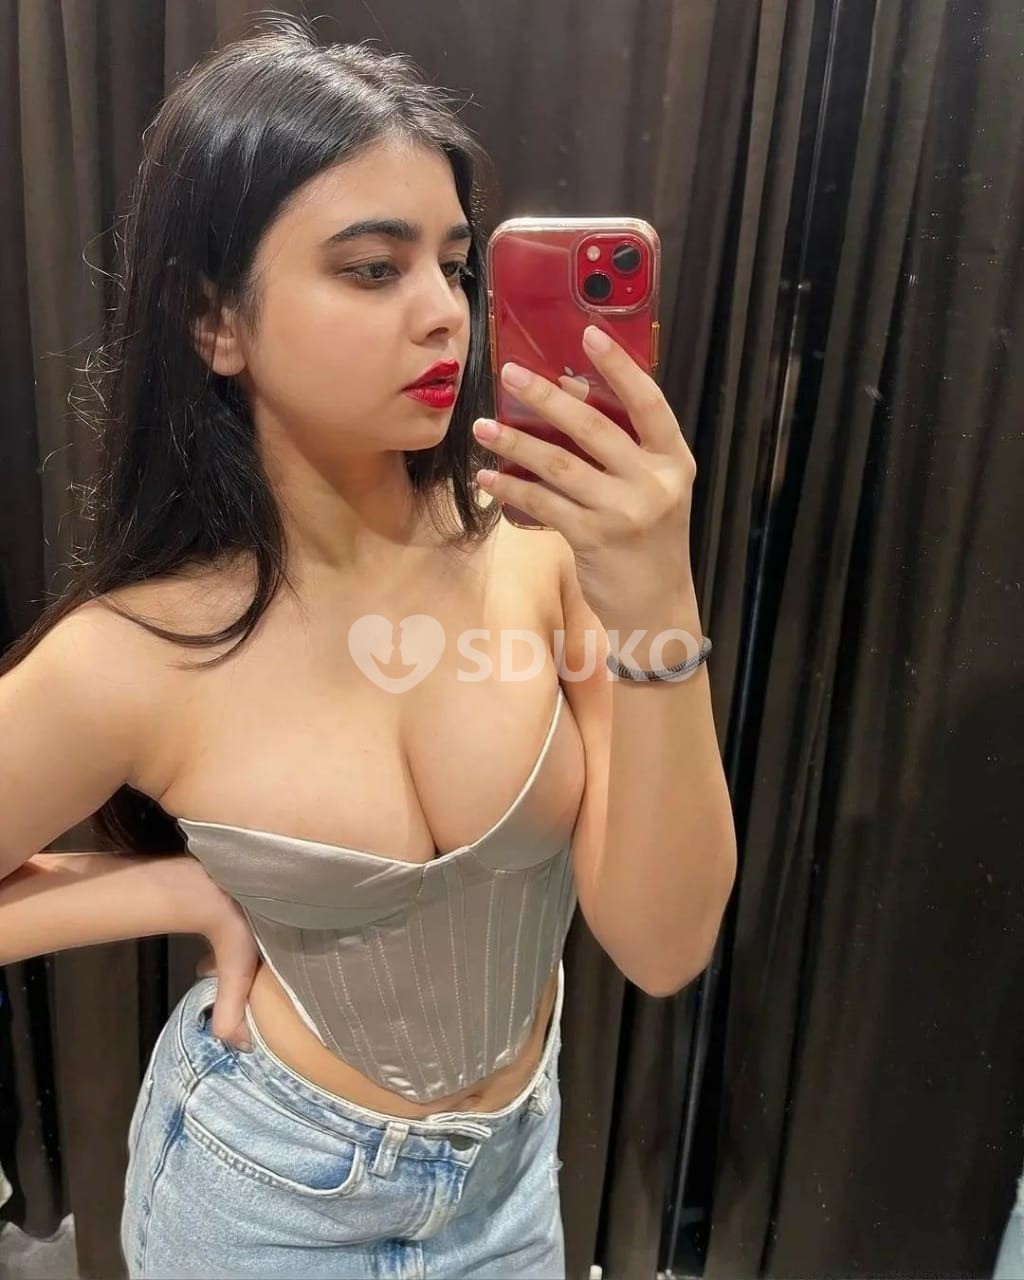 ABOHAR VIP TODAY LOW :)PRICE ESCORT 🥰SERVICE 100% SAFE AND SECURE ANYTIME CALL ME 24 X 7 SERVICE AVAILABLE 100% SAFE